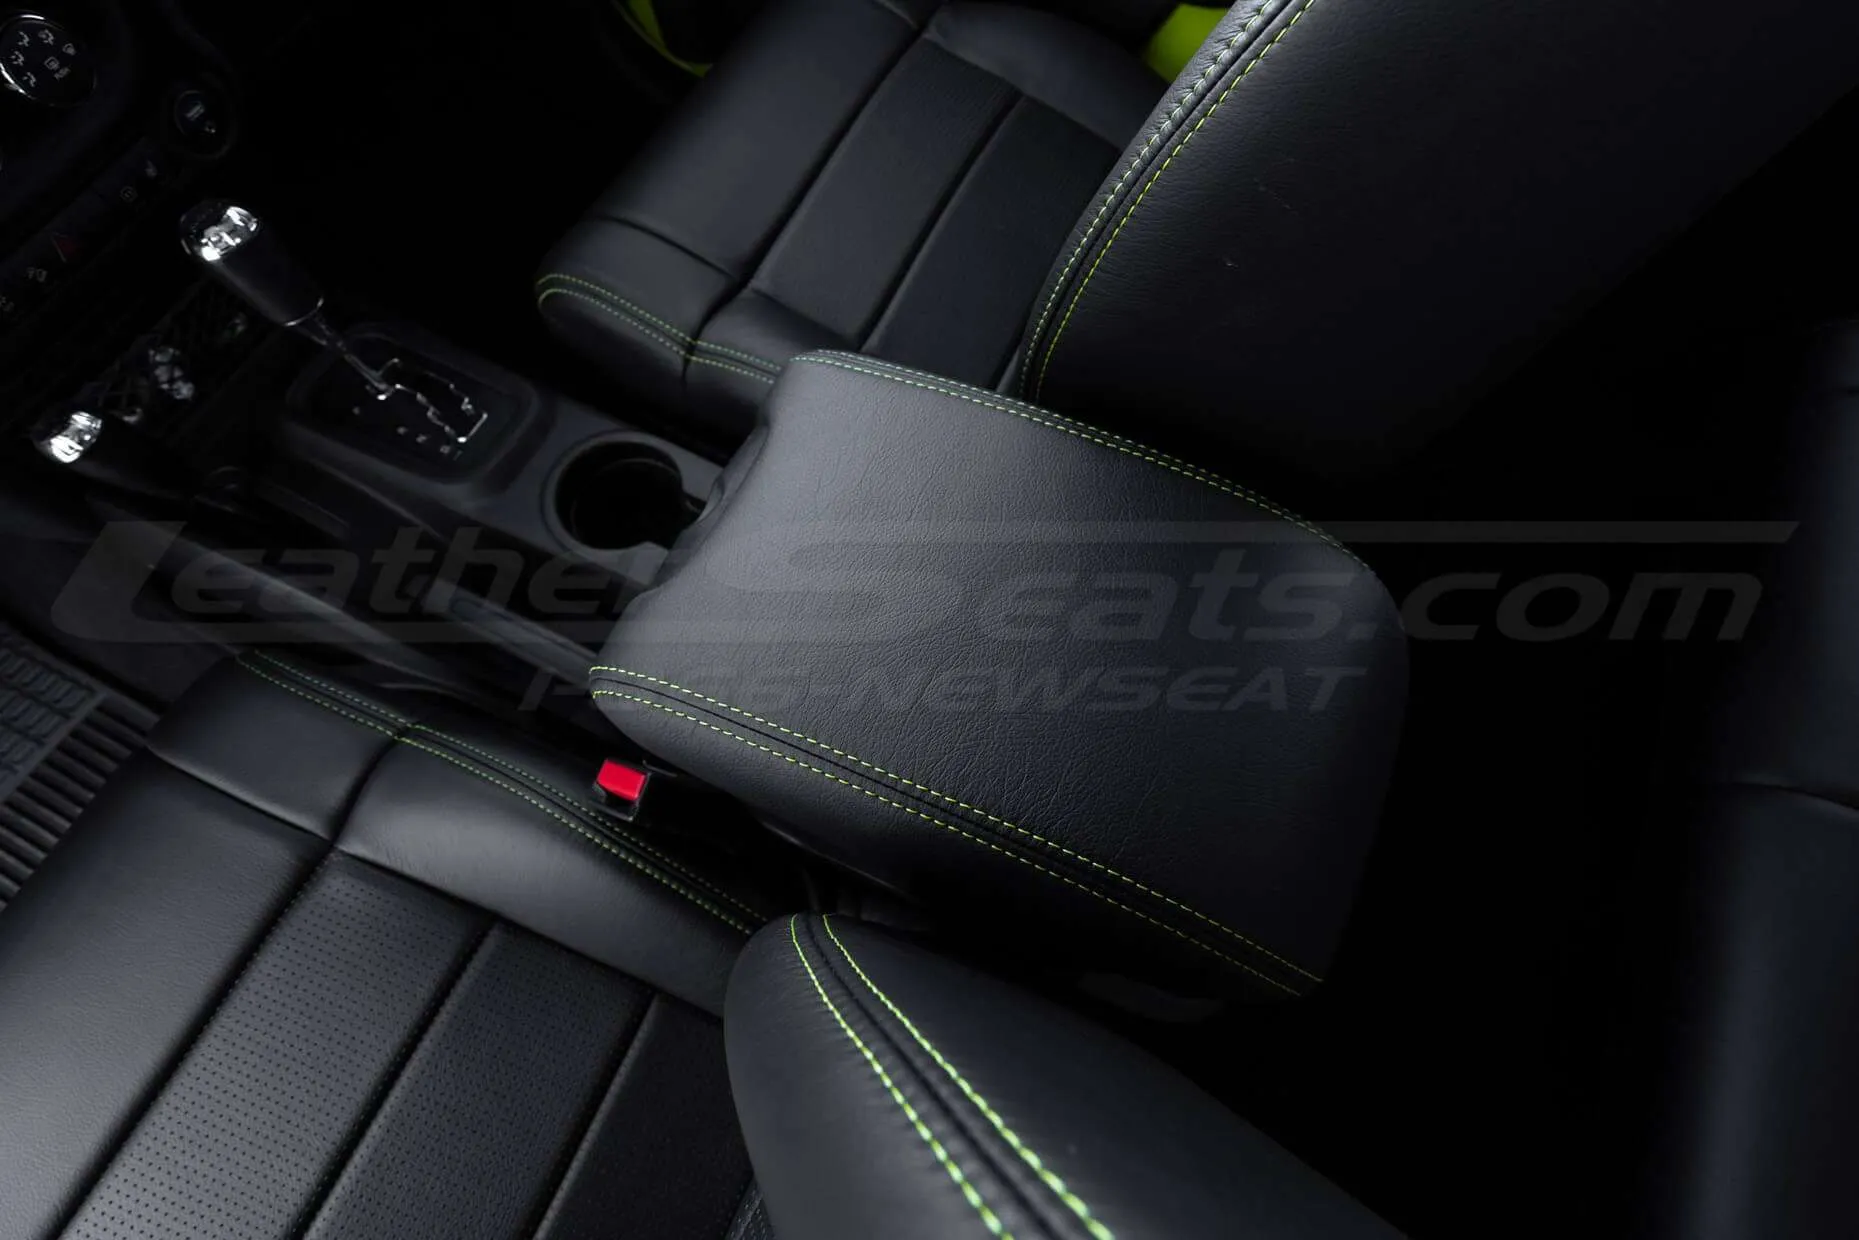 Top-down view of Black leather console lid with hyper green stitching